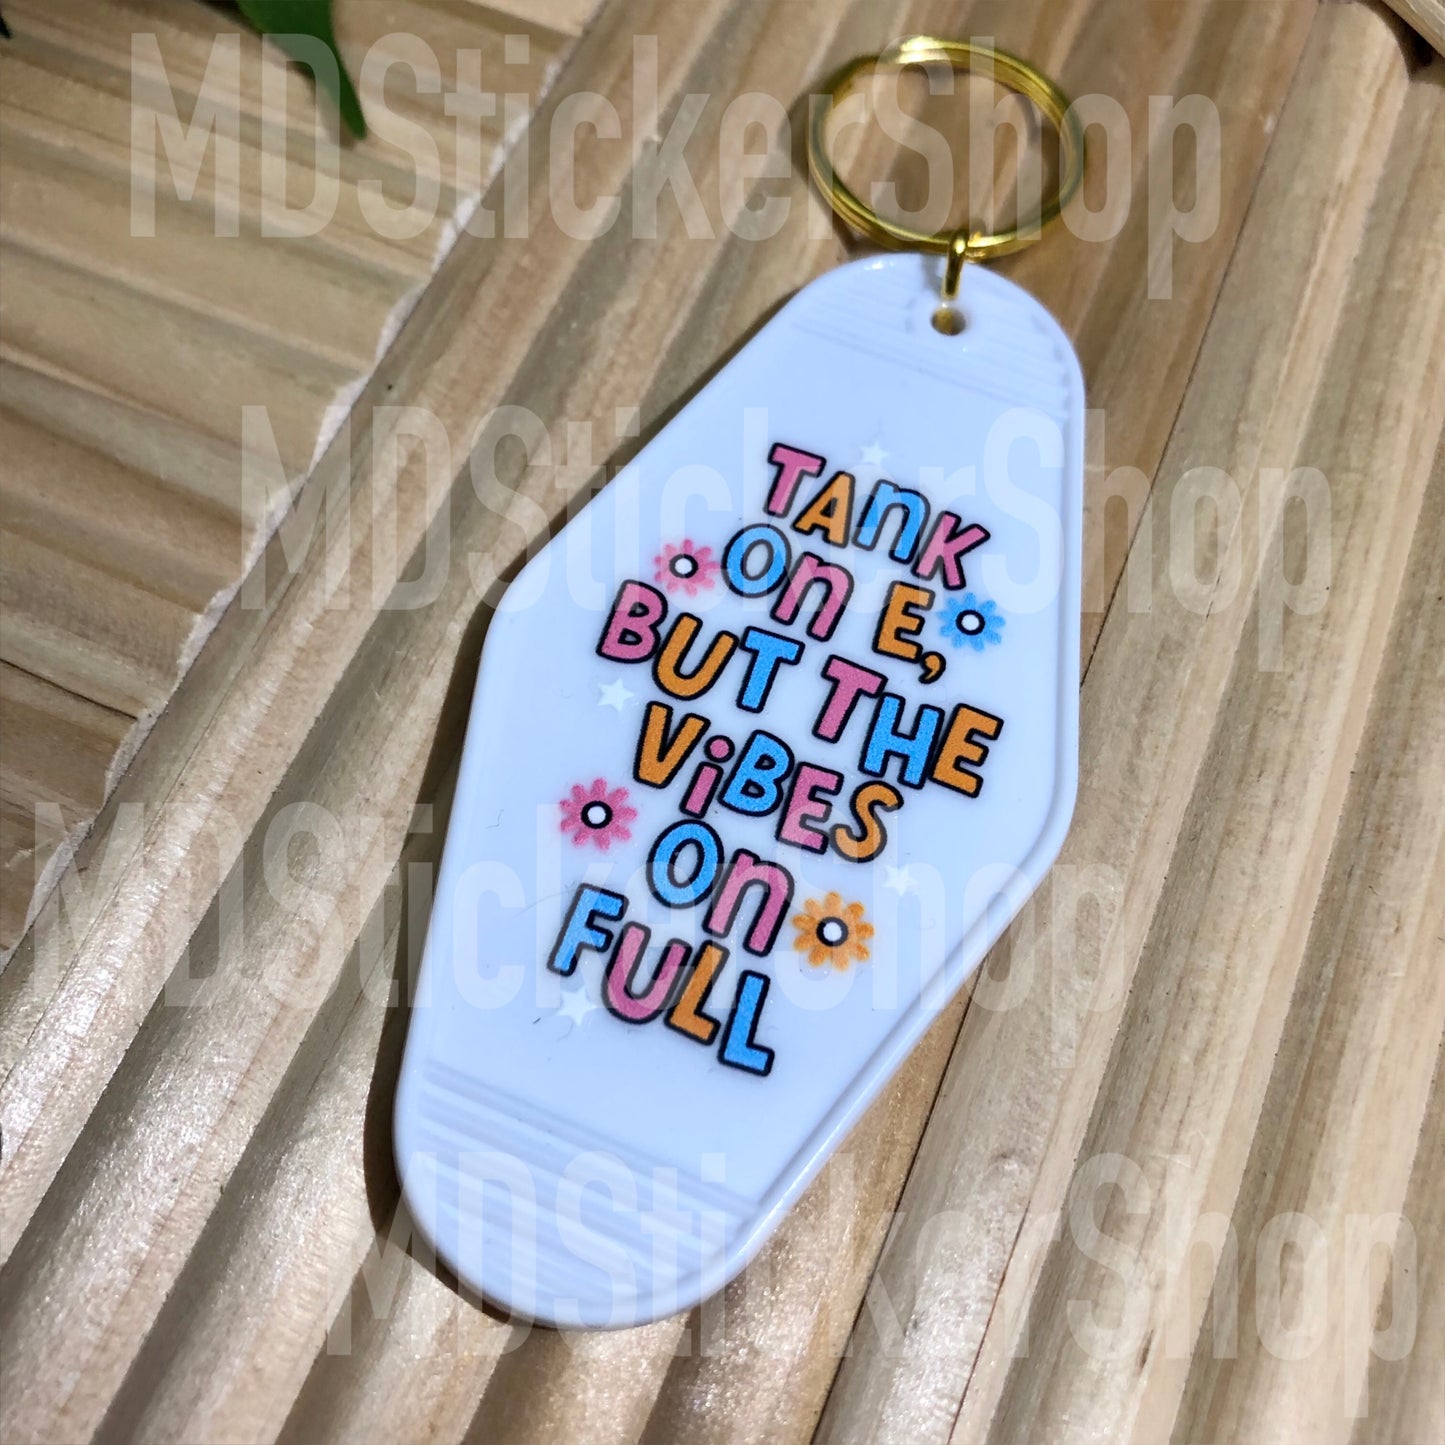 Tank on E, But the Vibes on Full White Hotel Keychain, Acrylic Keychain